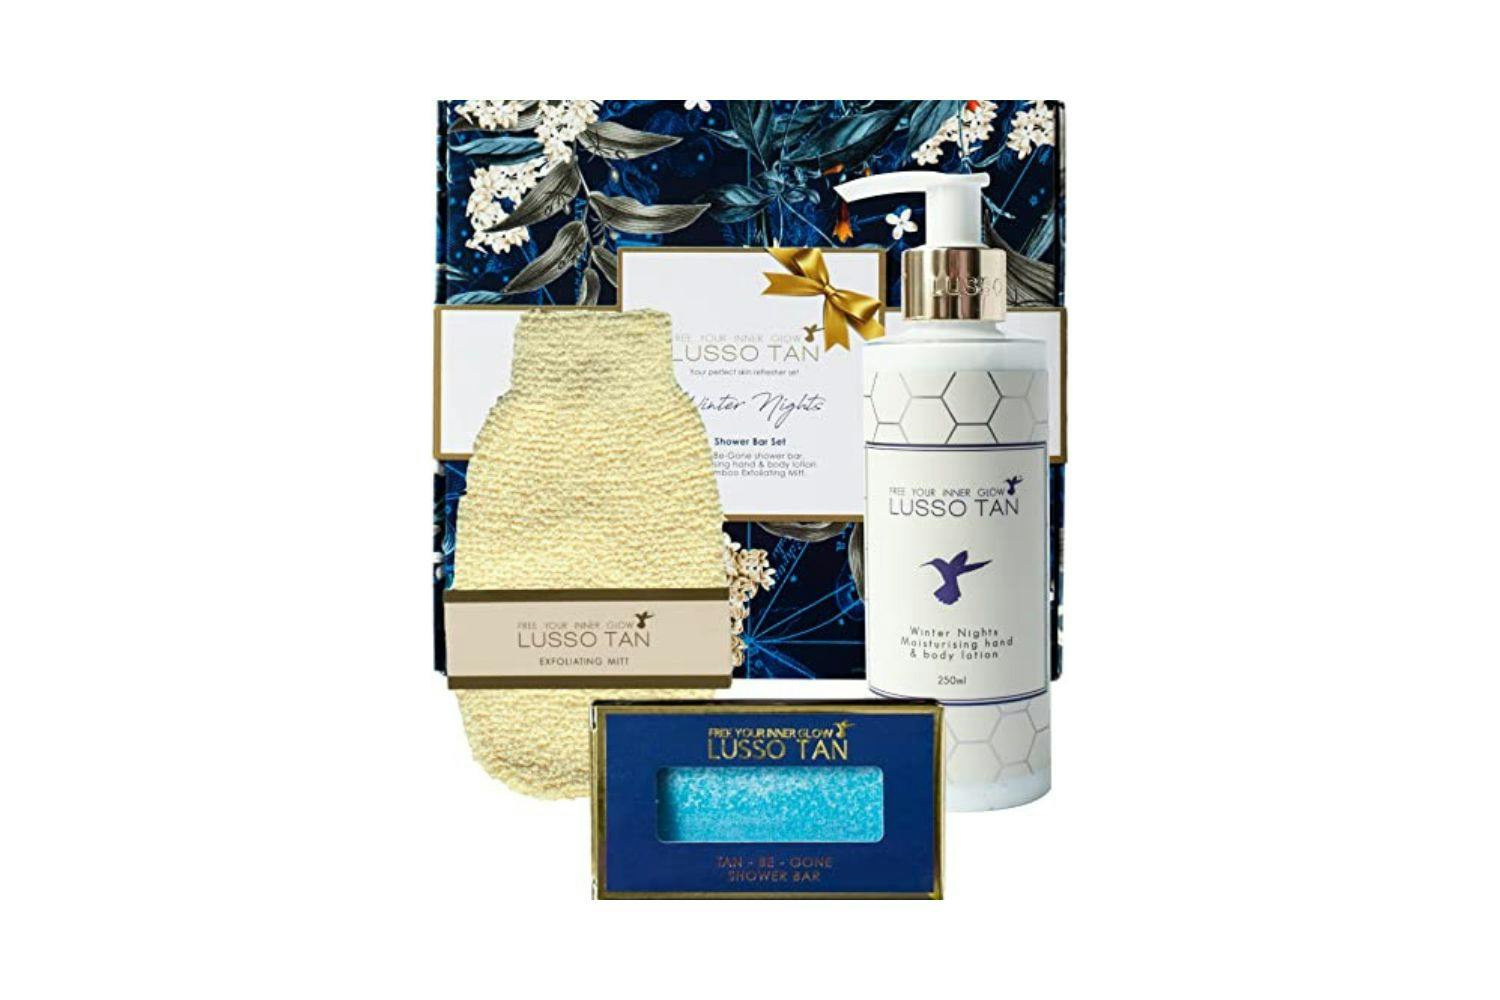 Lusso Tan LTLYSWNSB Love Your Skin Collection Winter Nights Shower